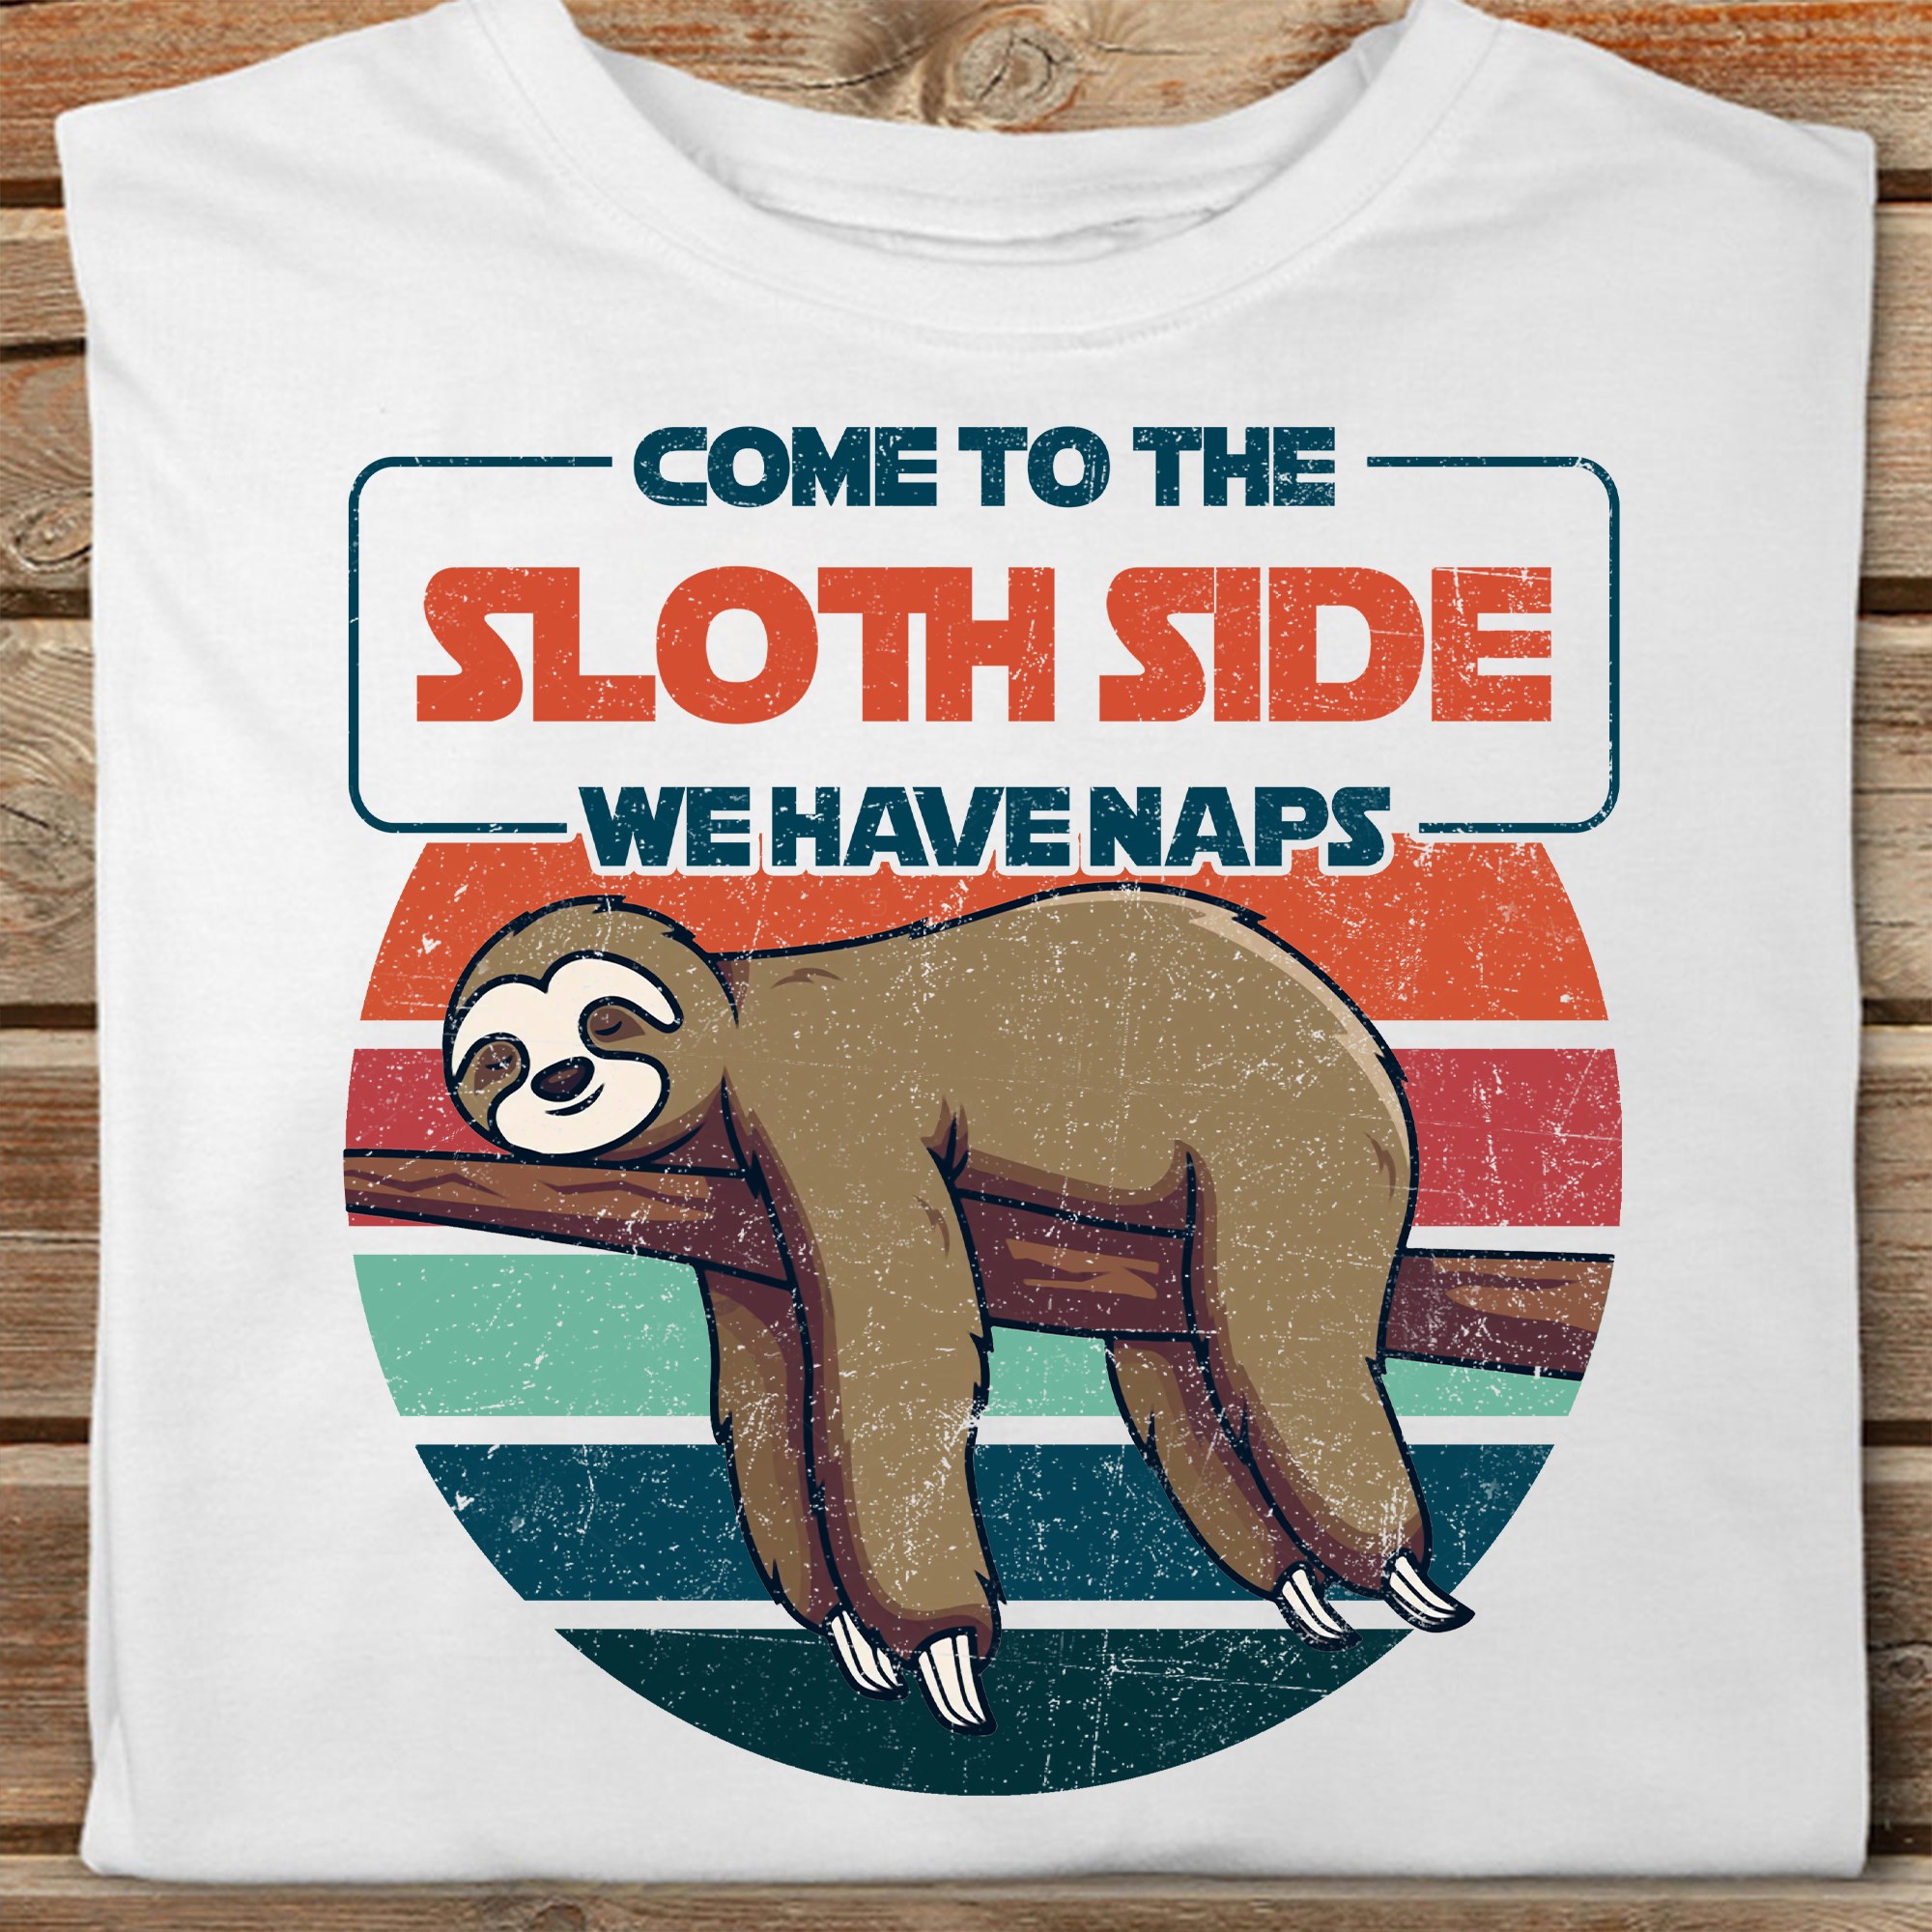 Come to the sloth side we have naps - Sleeping sloth